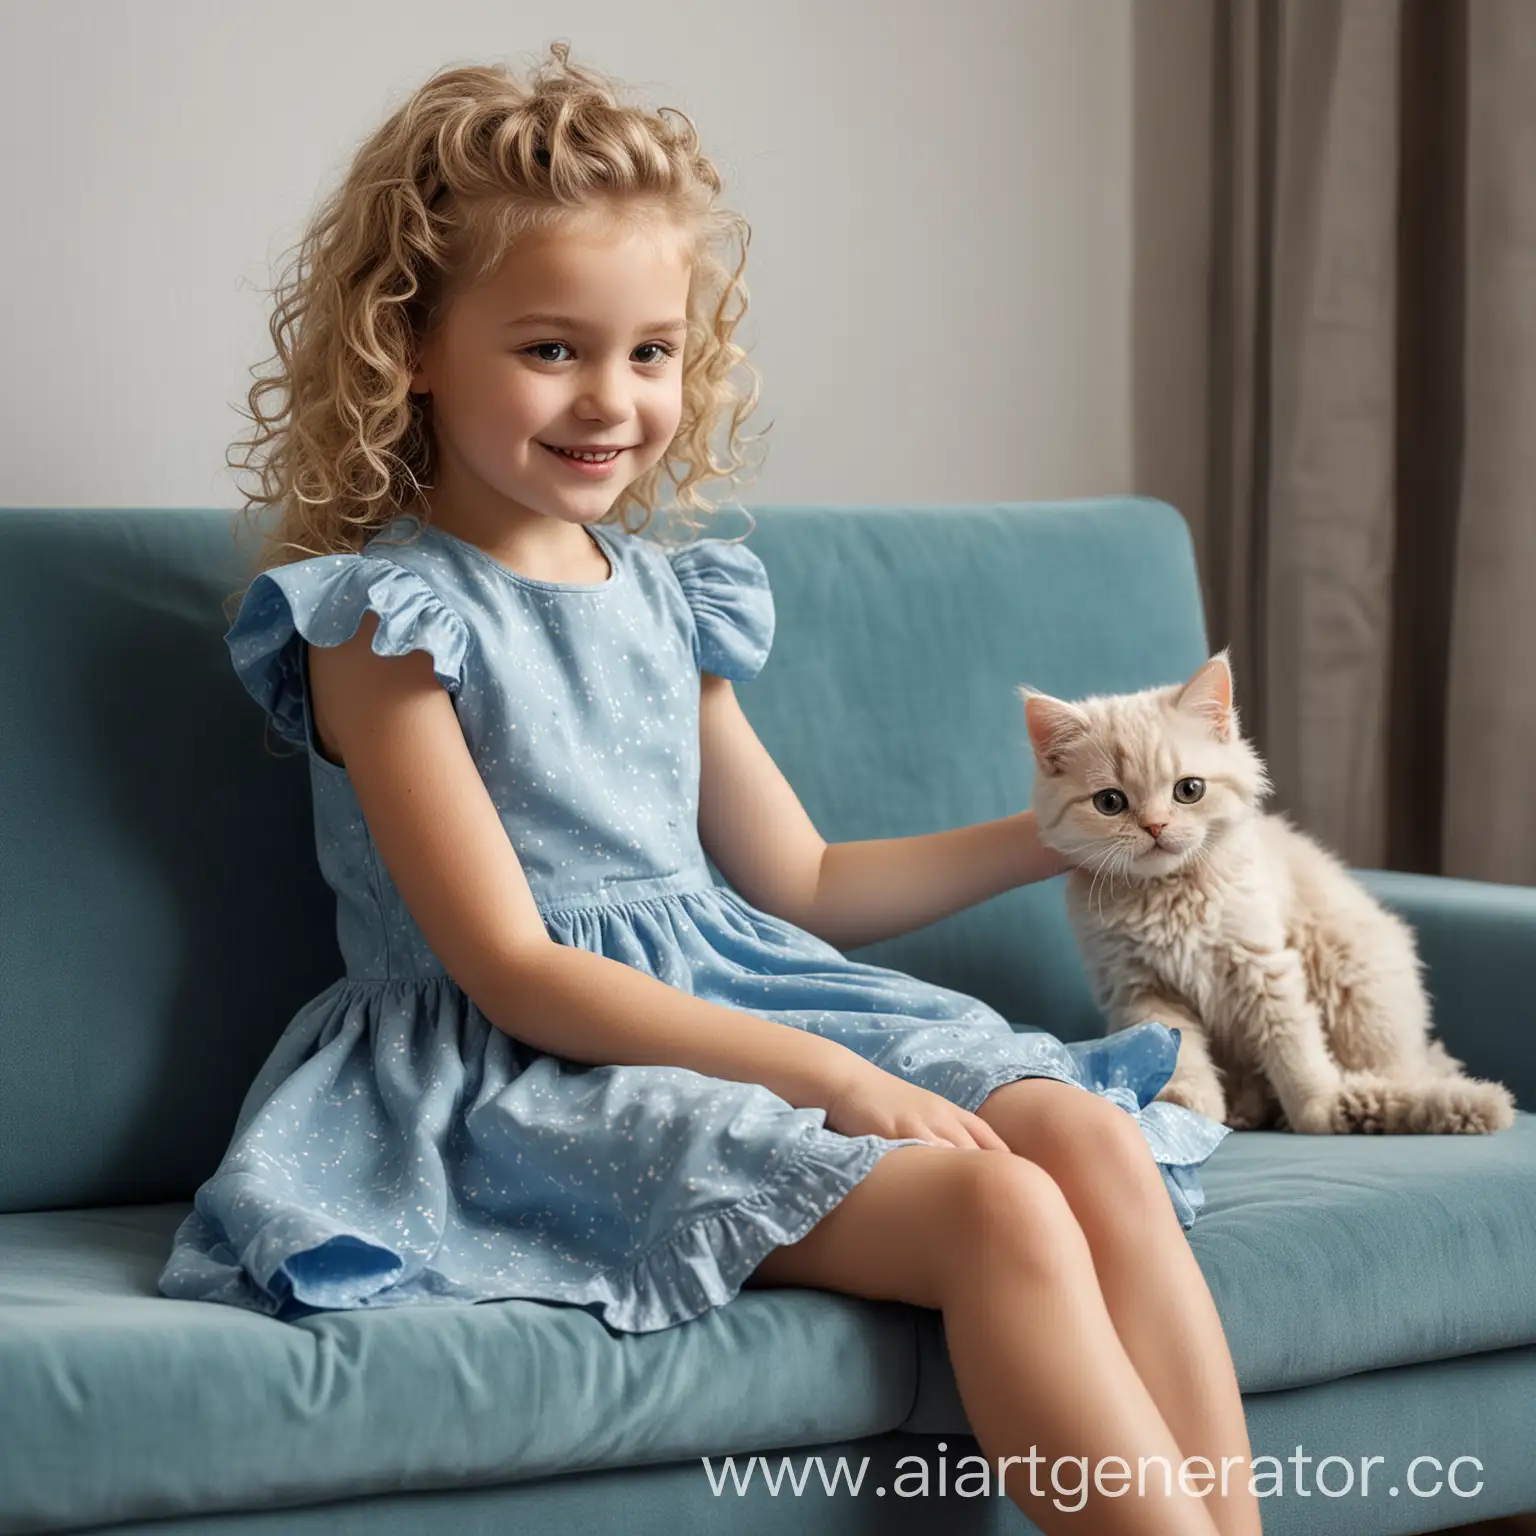 Young-Girl-Playing-with-Robotic-Cat-in-Childrens-Room